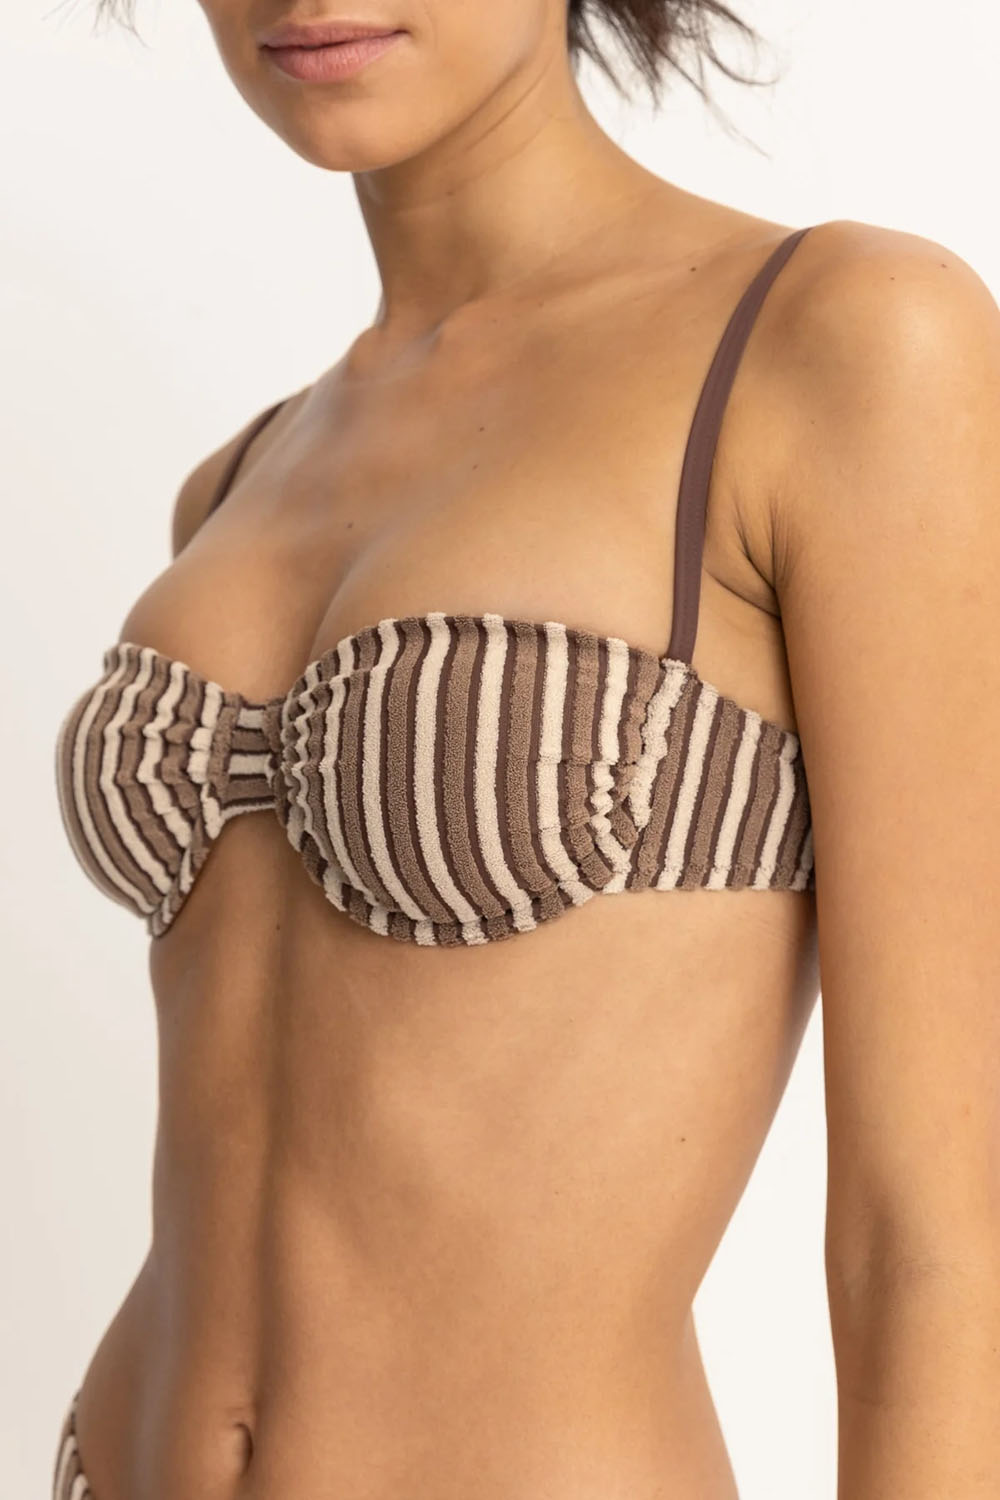 Rhythm - Terry Sands Stripe Underwire Top - Cocoa - Detail